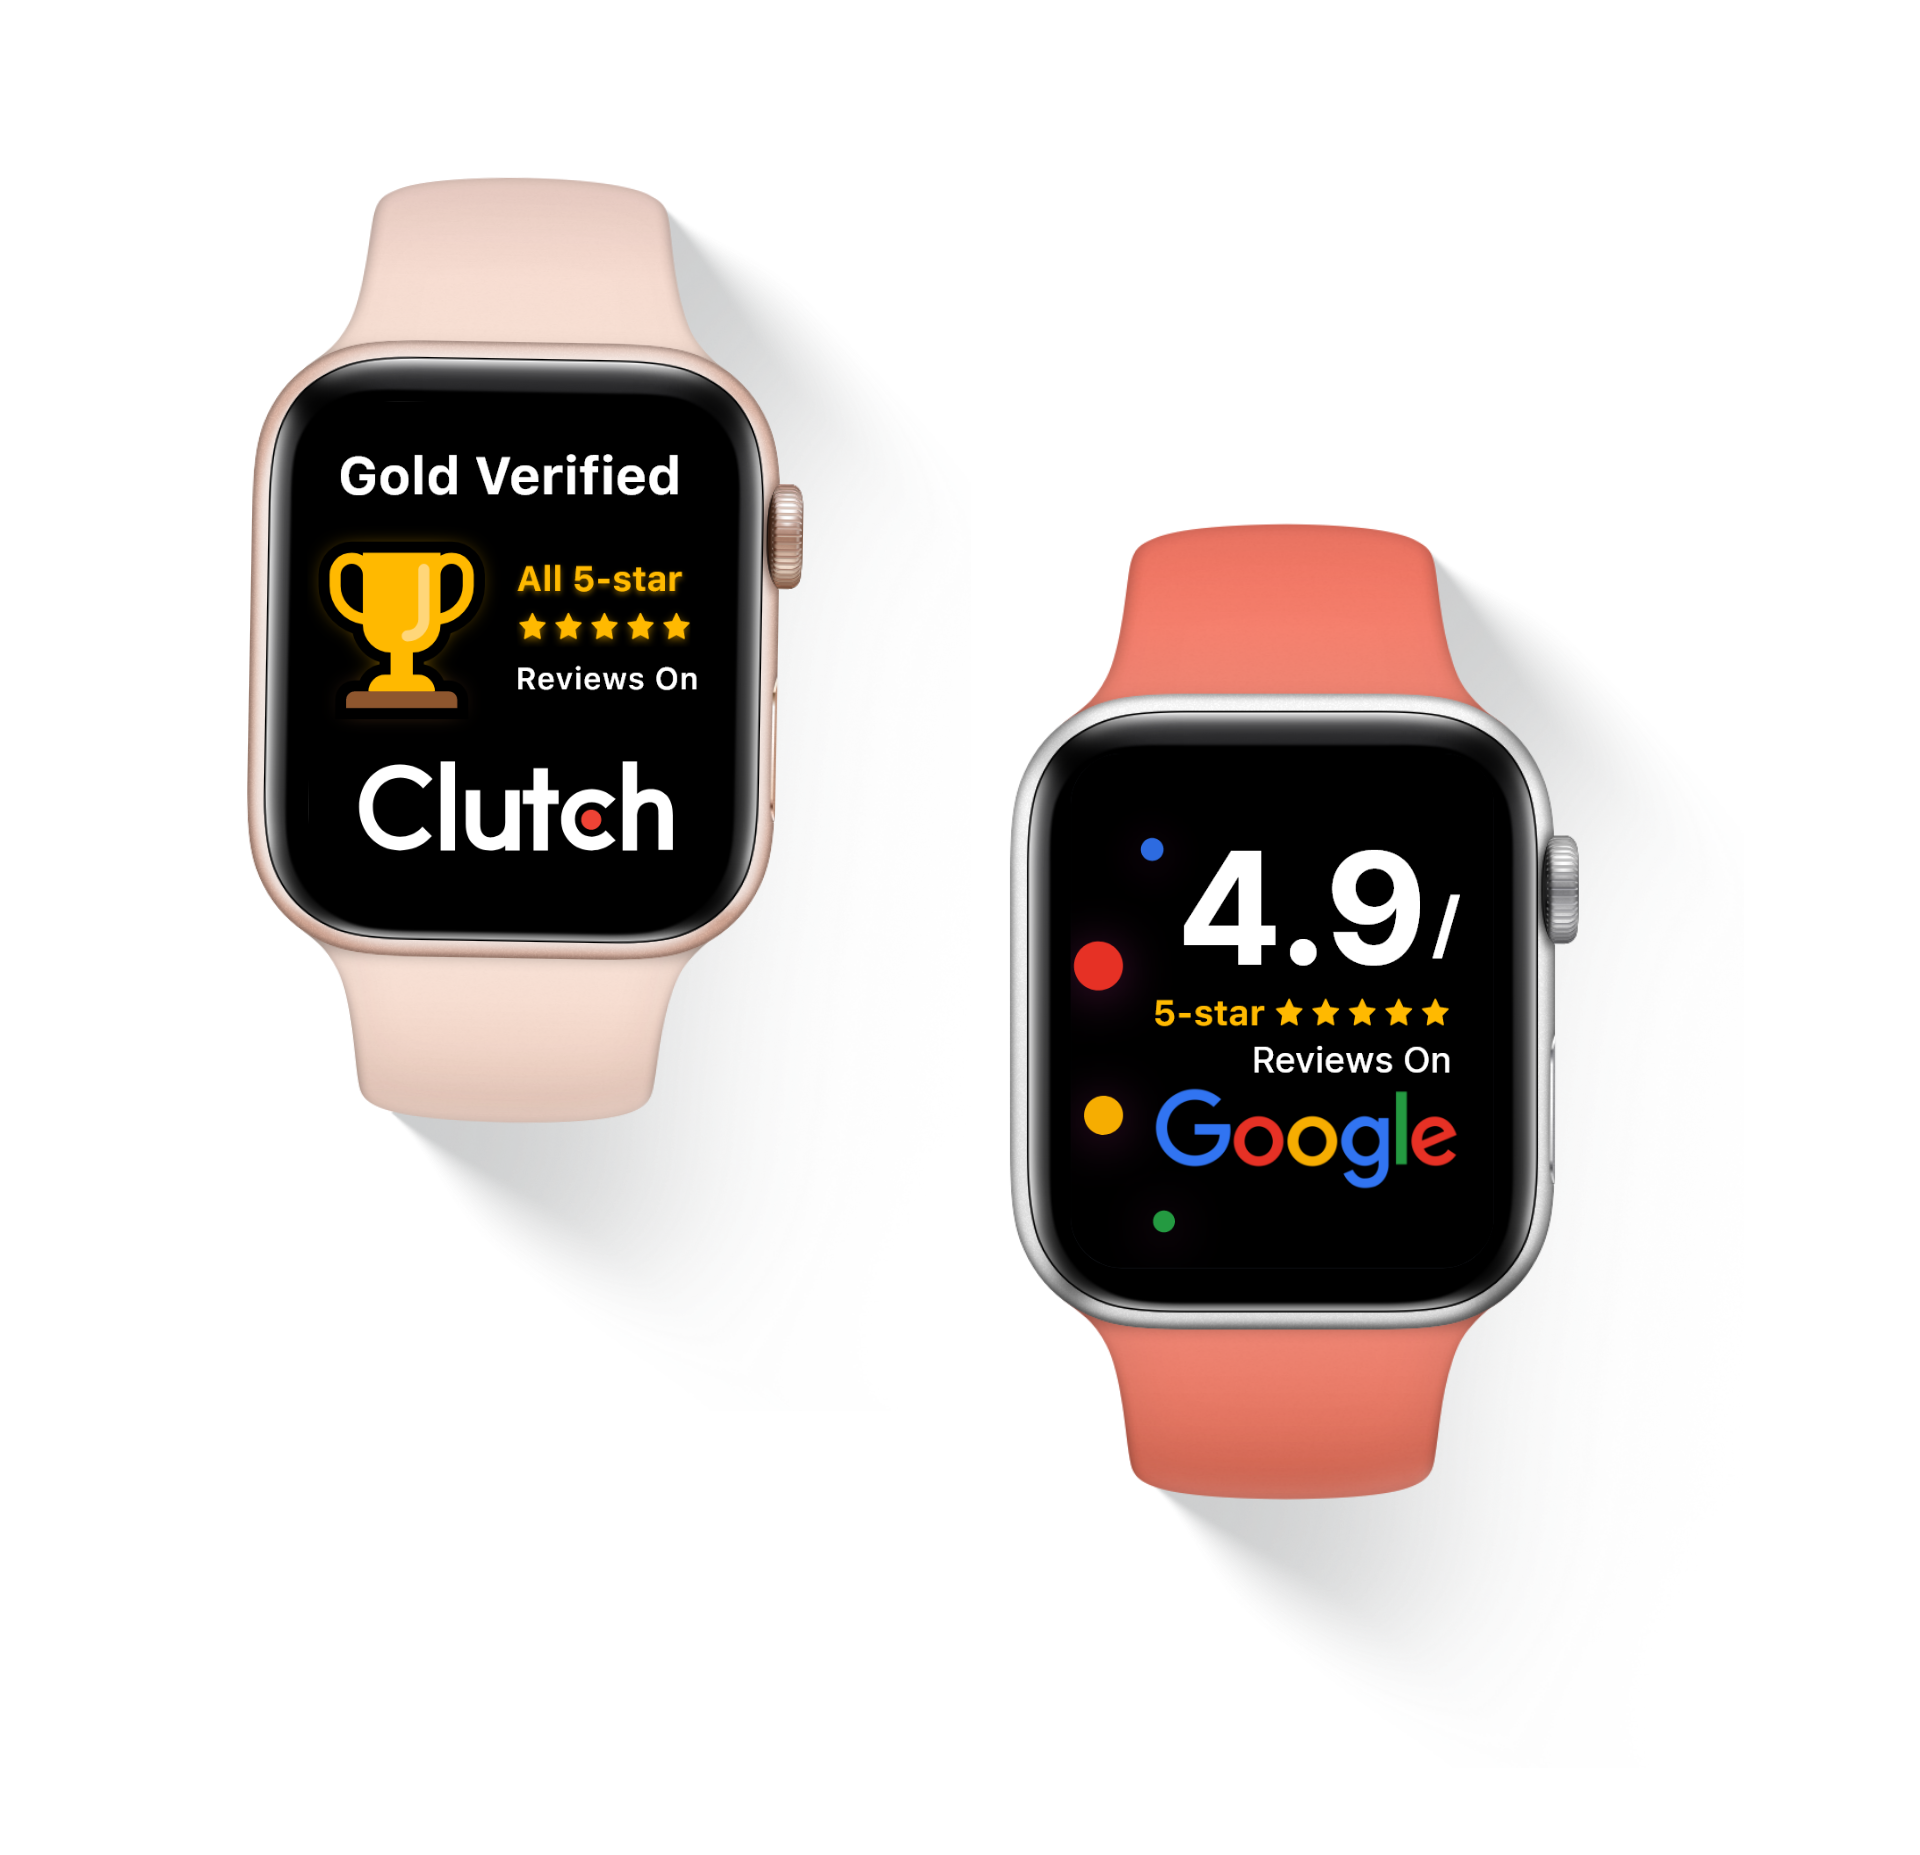 HAMAD: Appetiser's Clutch and Google review ratings